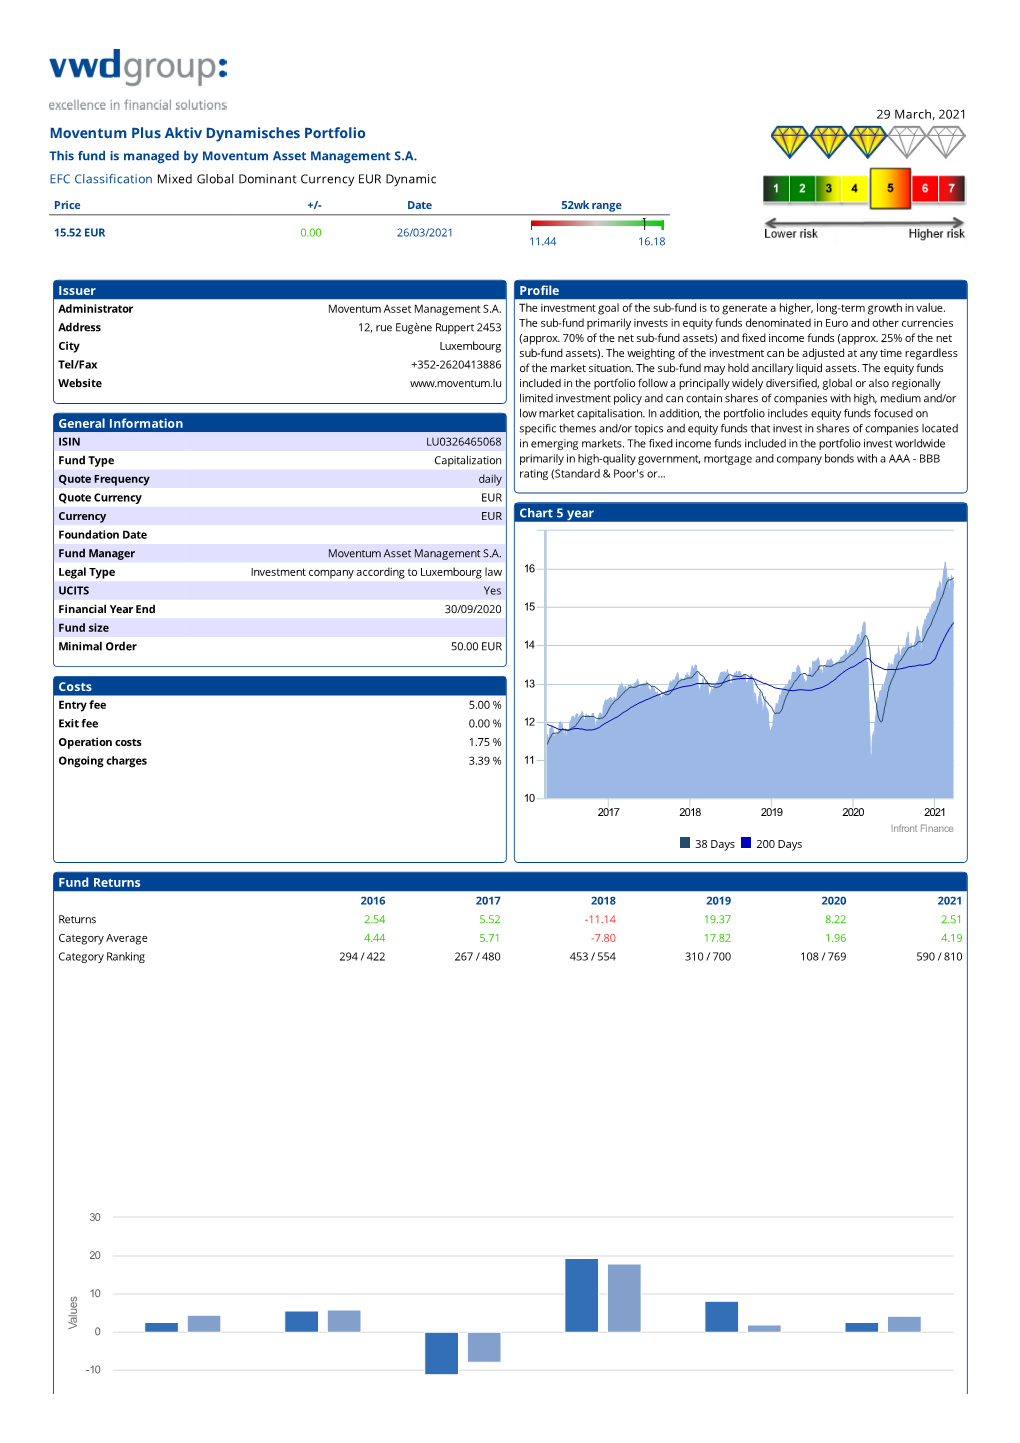 Moventum Plus Aktiv Dynamisches Portfolio This Fund Is Managed by Moventum Asset Management S.A